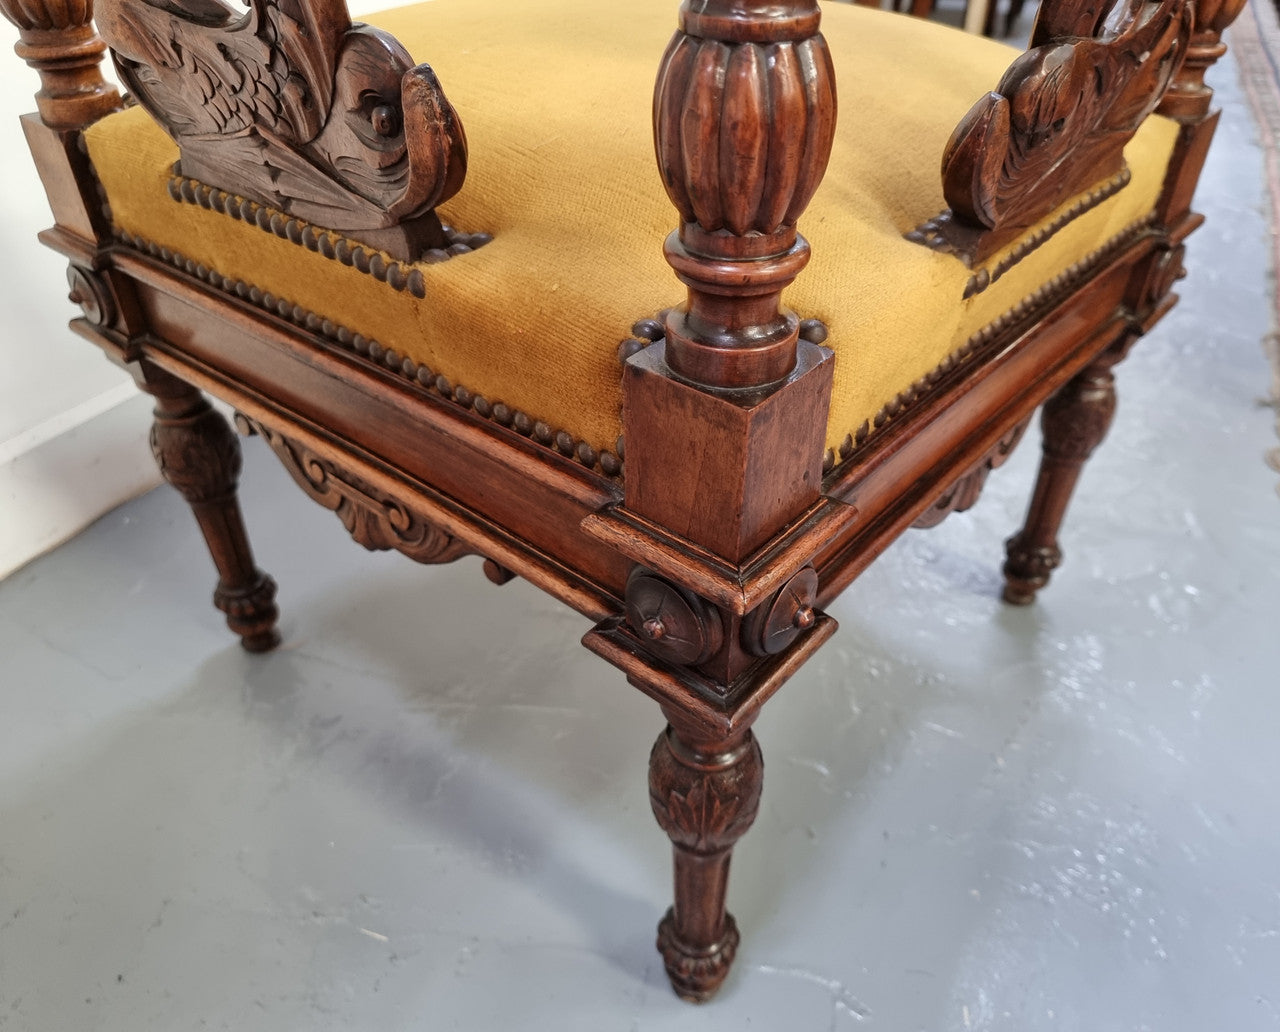 Beautifully carved French Walnut corner chair with upholstered seat. In good original detailed condition.